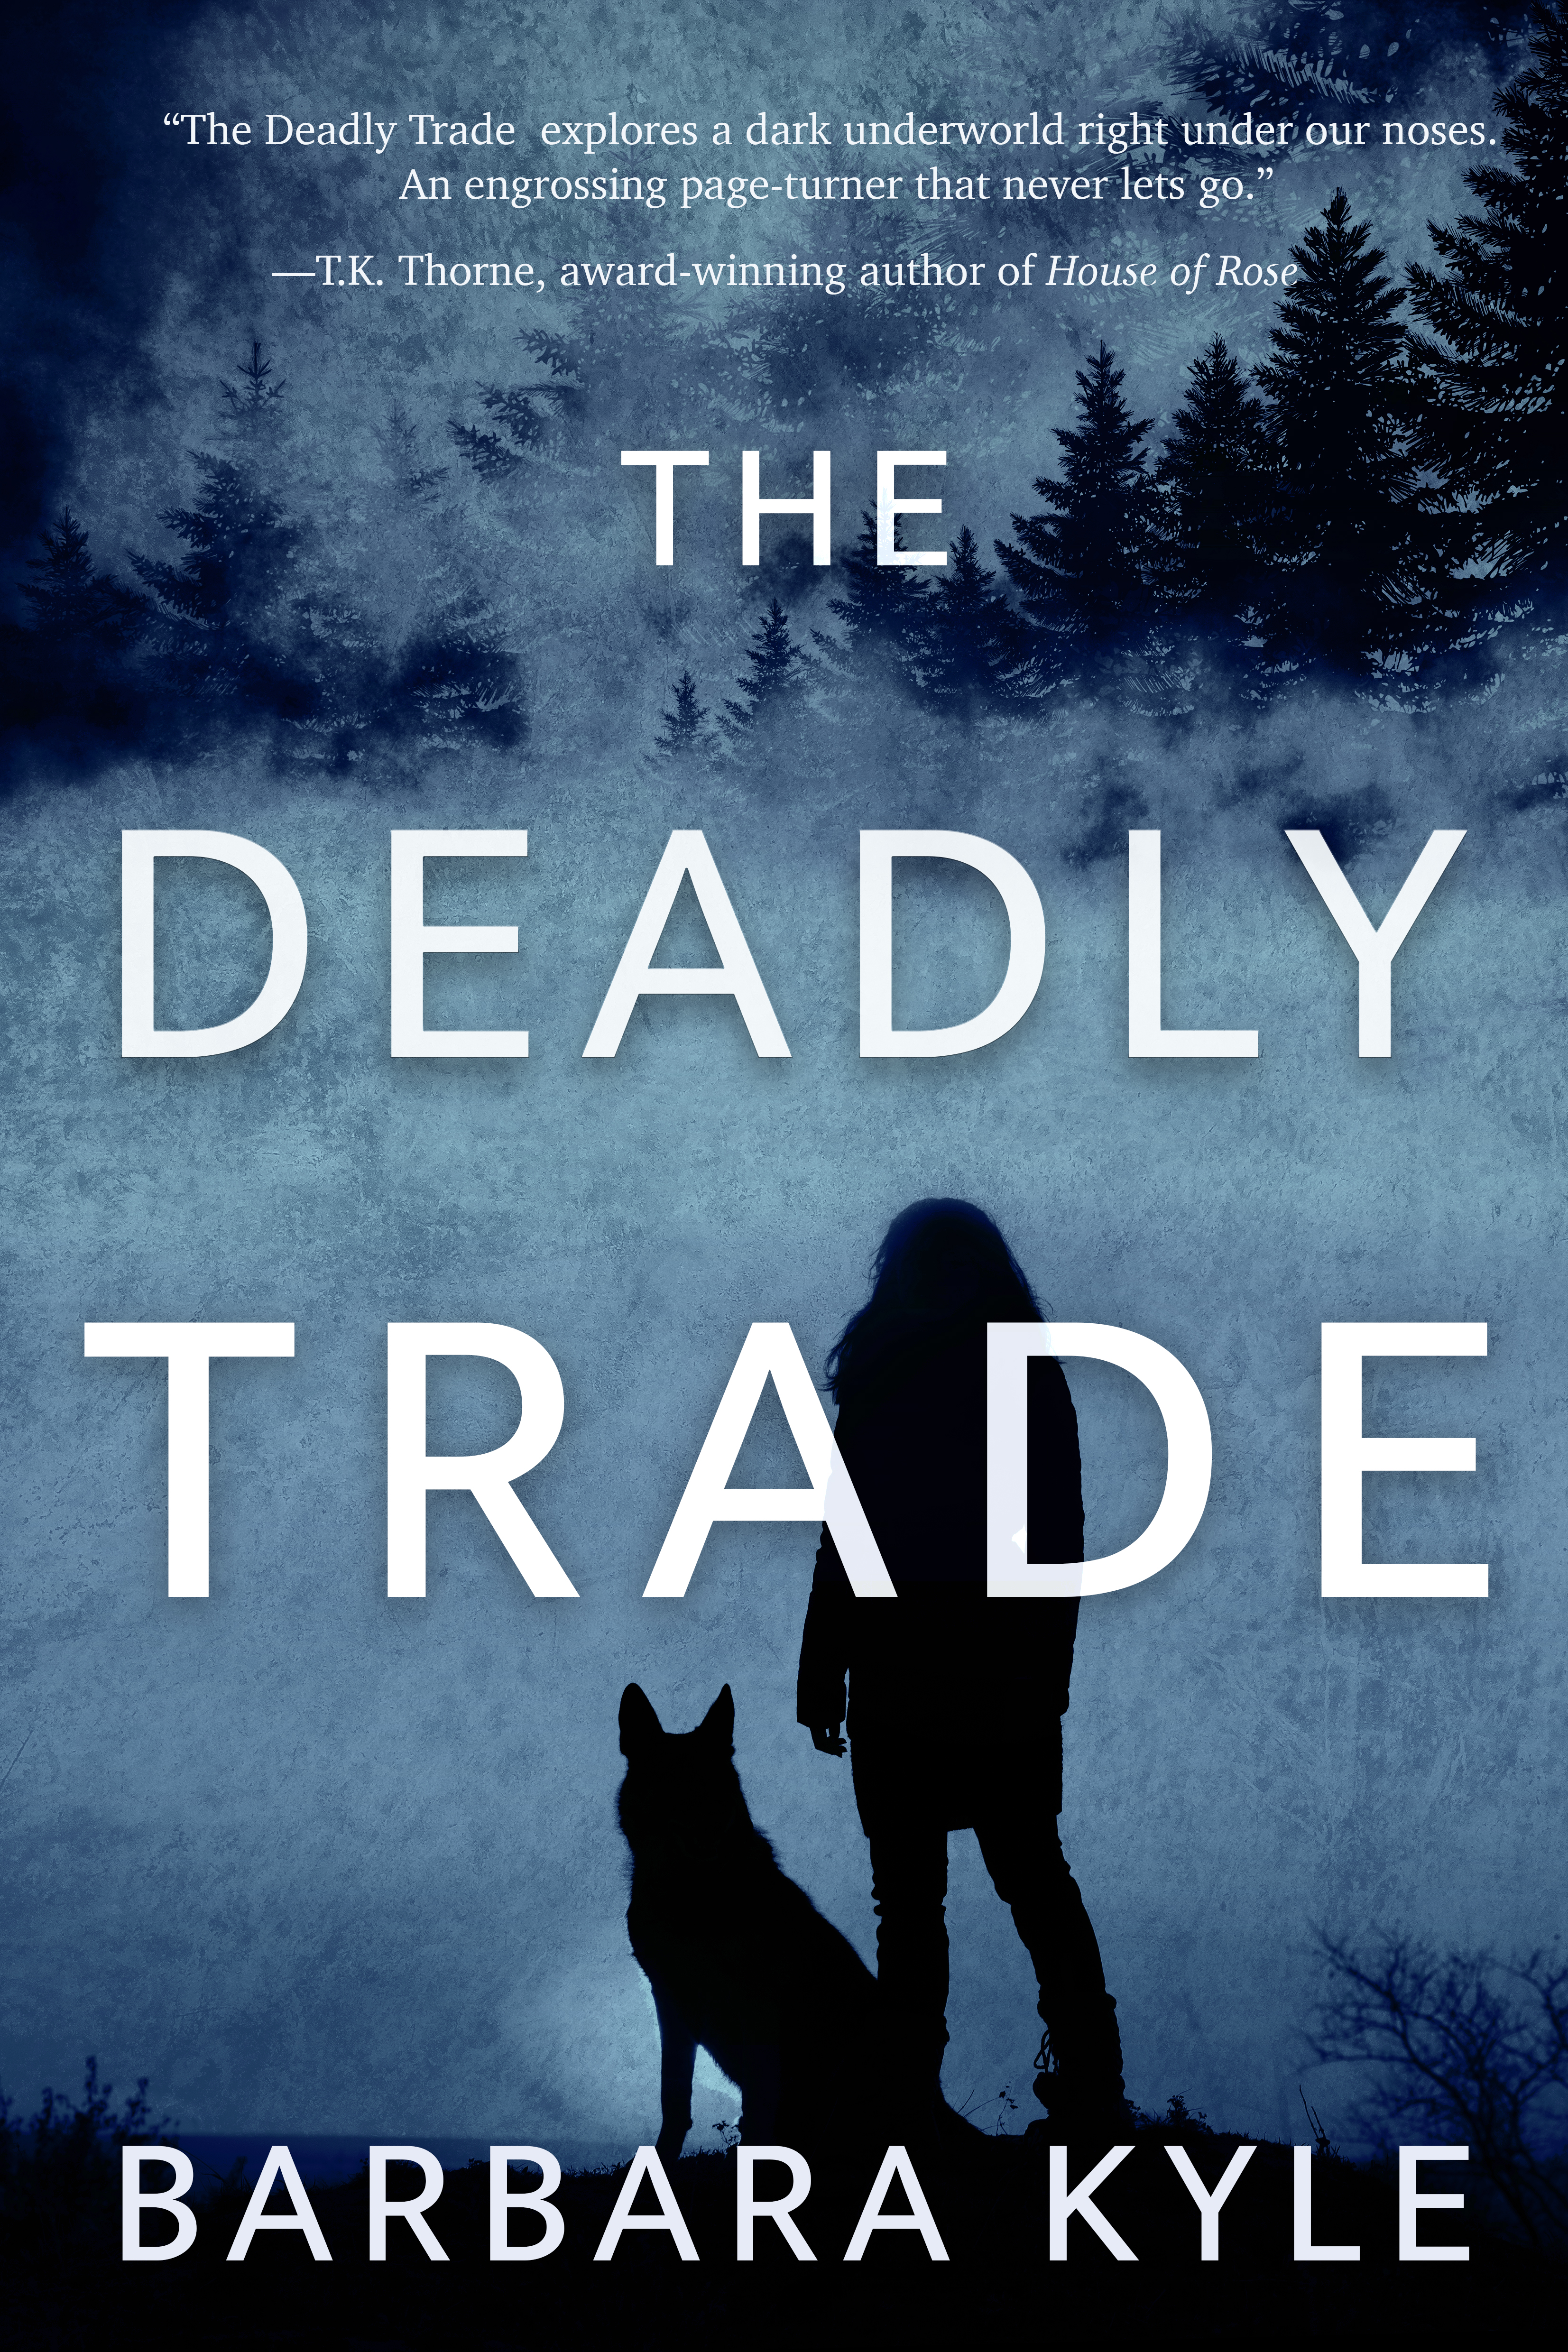 The Deadly Trade by Barbara Kyle